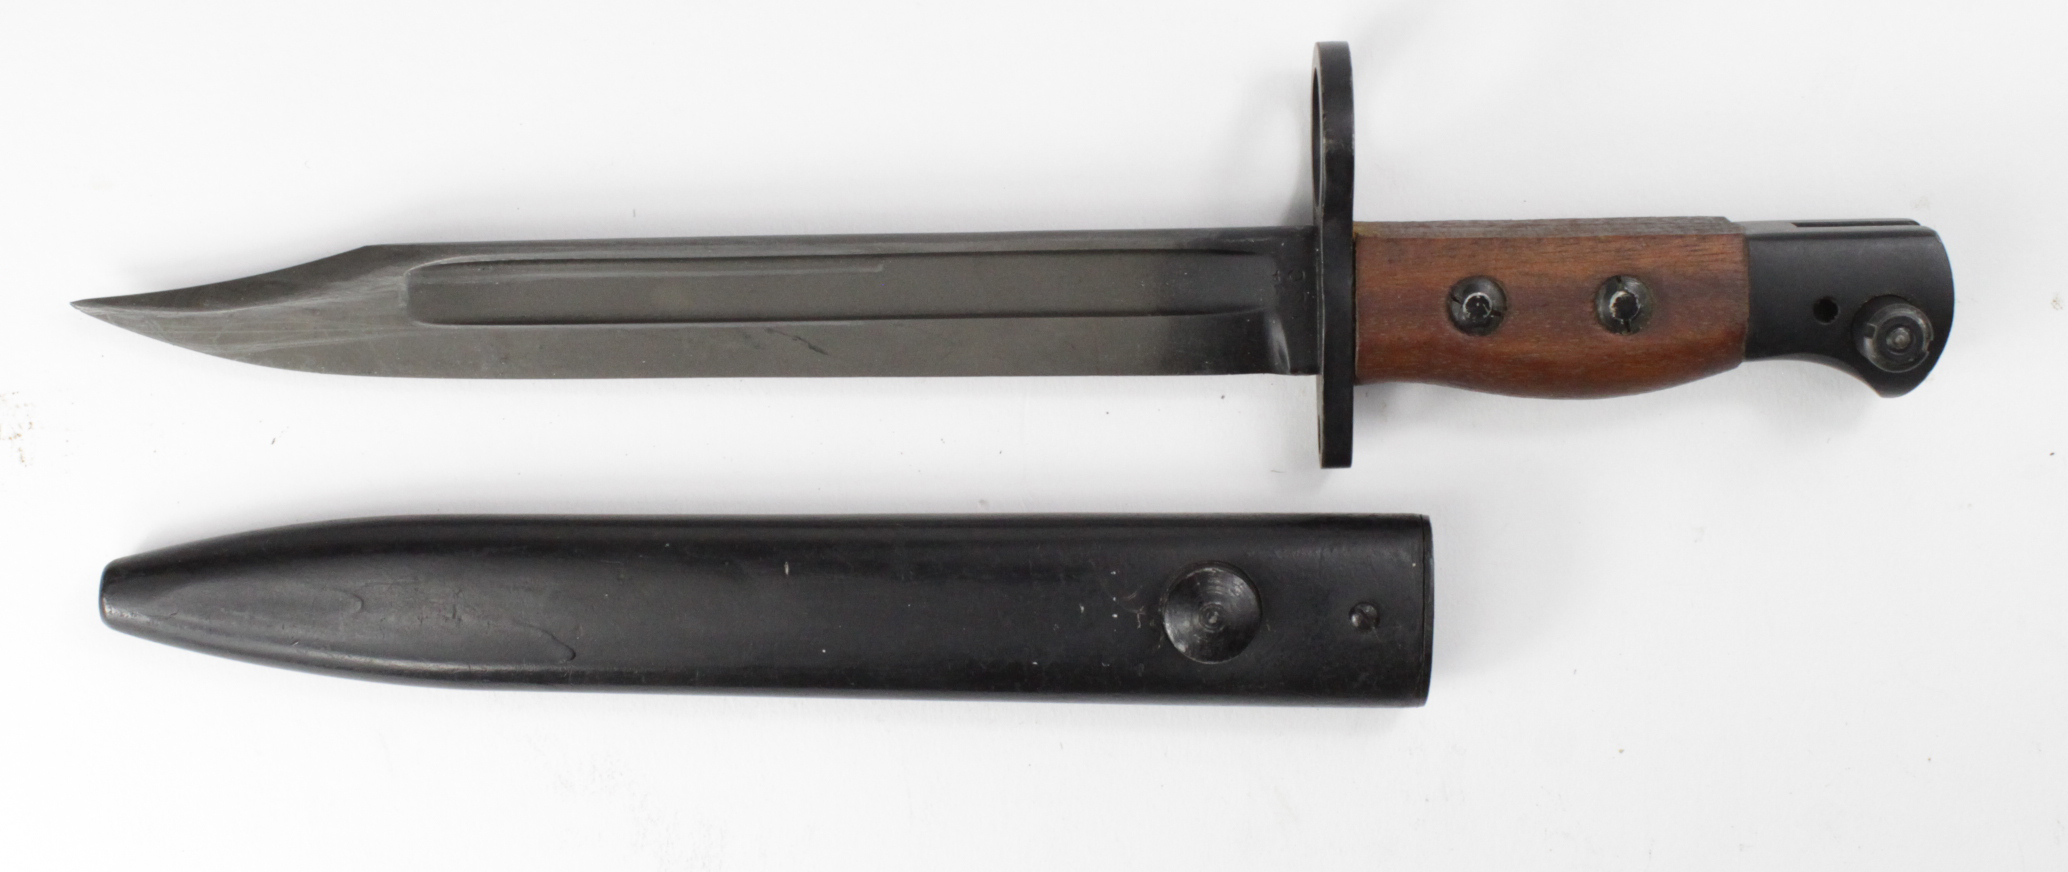 Bayonet: No5 MK1 for the Lee Enfield Jungle Carbine. Parkerised Bowie blade 8". Ricasso marked 'W.